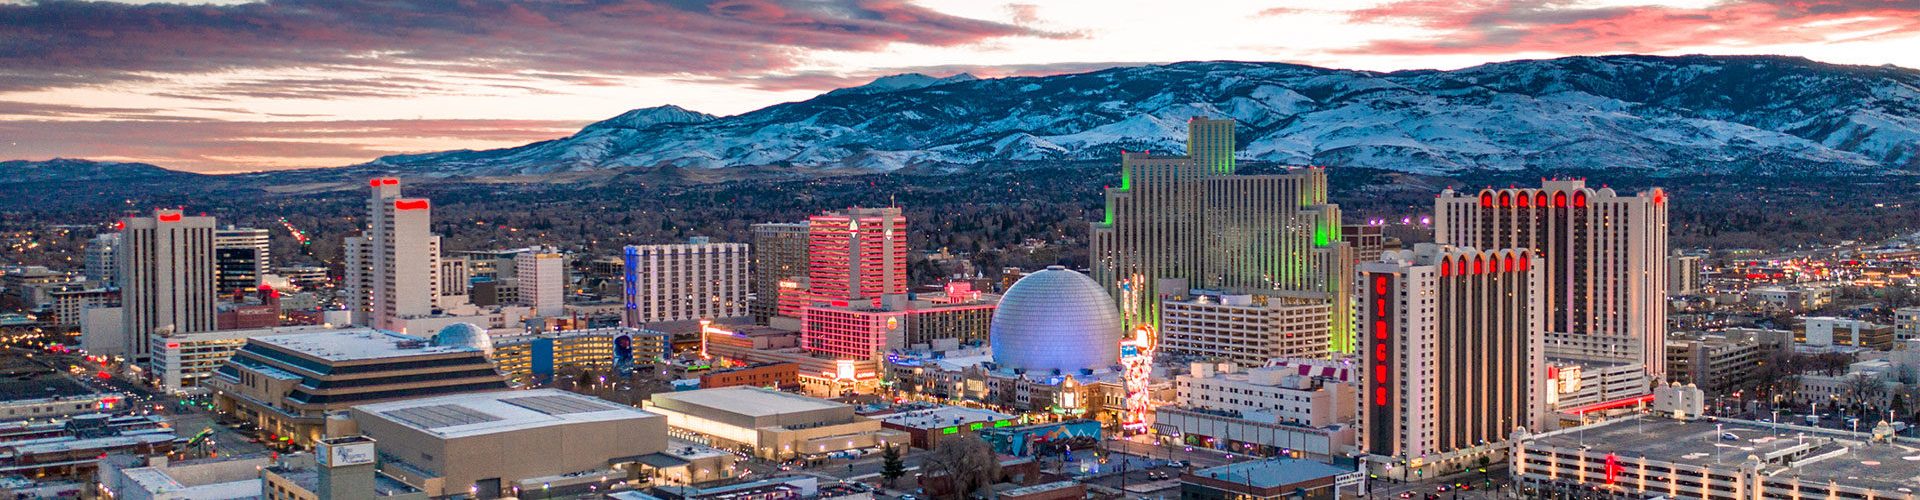 Cheap flights from Pittsburgh to Reno from $289